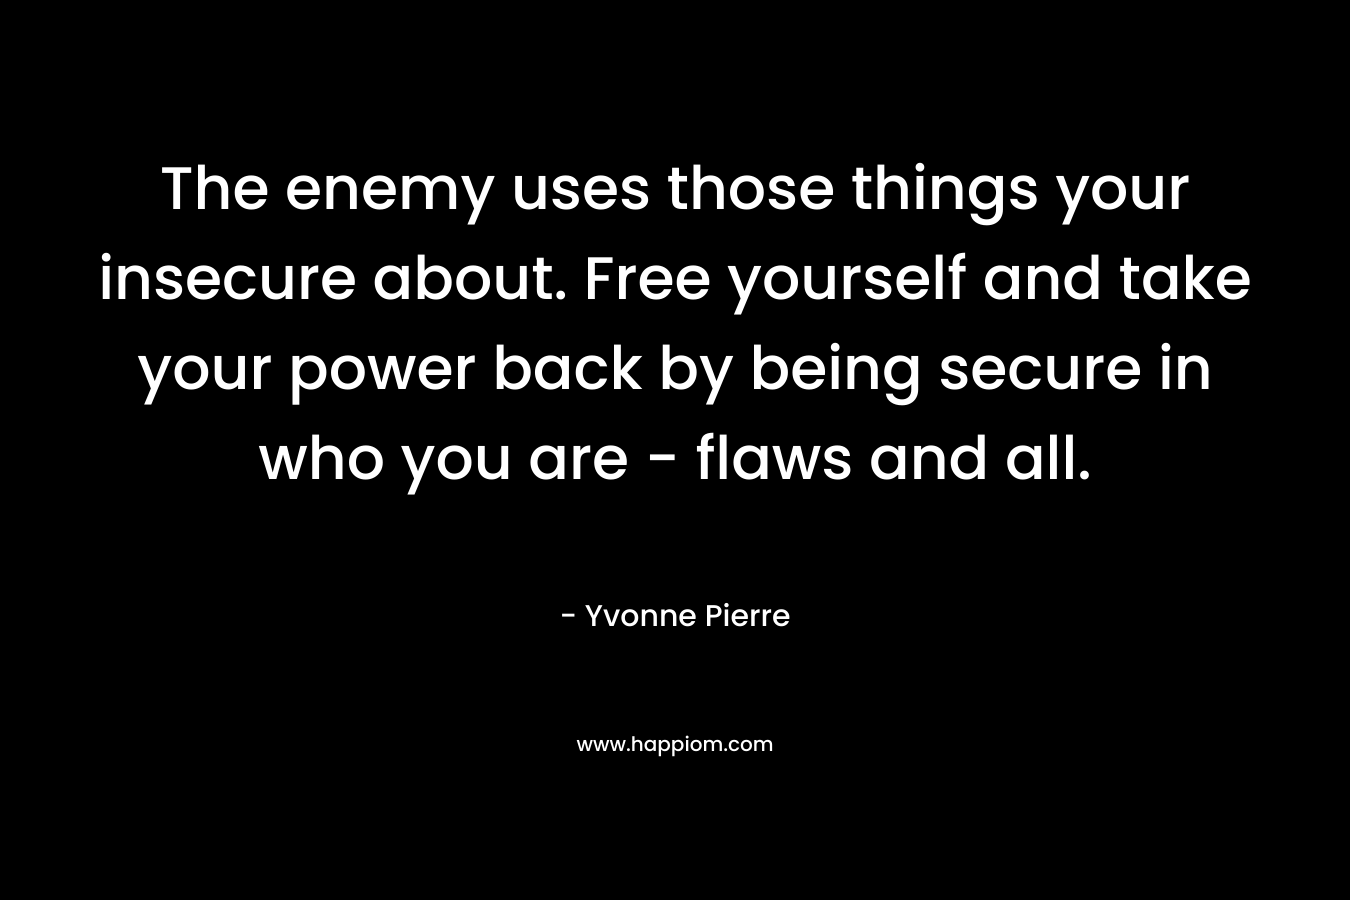 The enemy uses those things your insecure about. Free yourself and take your power back by being secure in who you are – flaws and all. – Yvonne Pierre